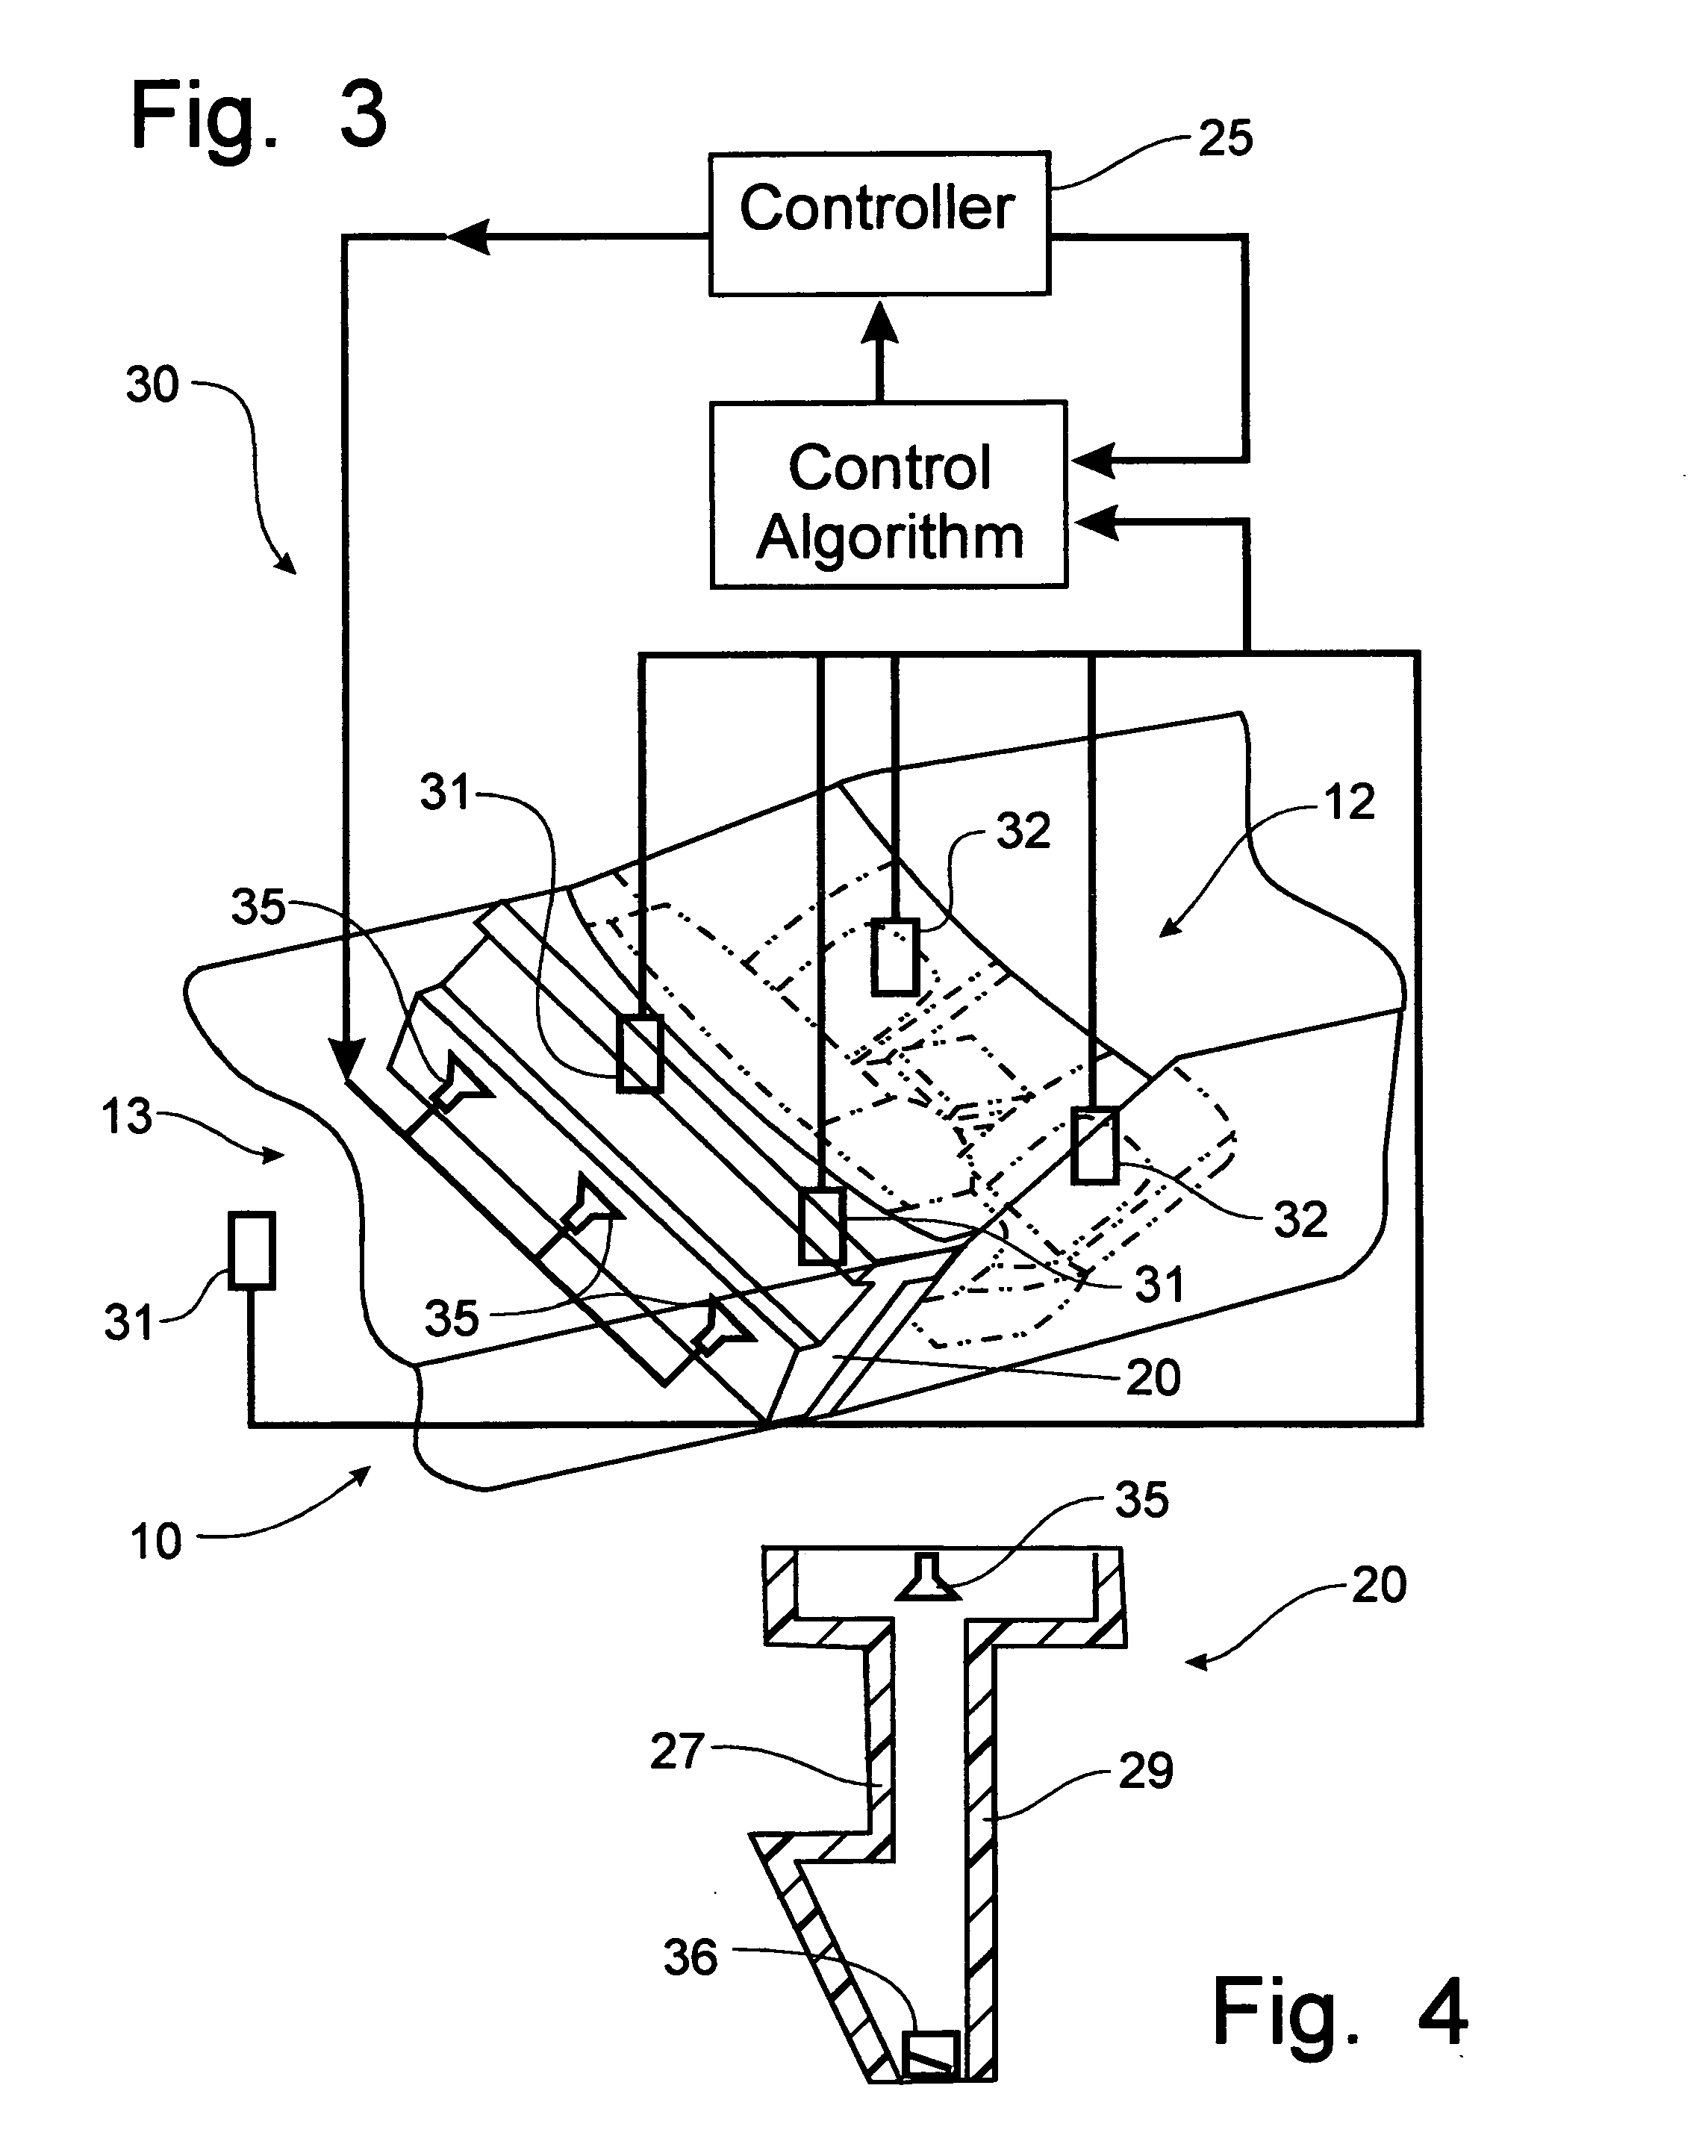 Indirect acoustic transfer control of noise